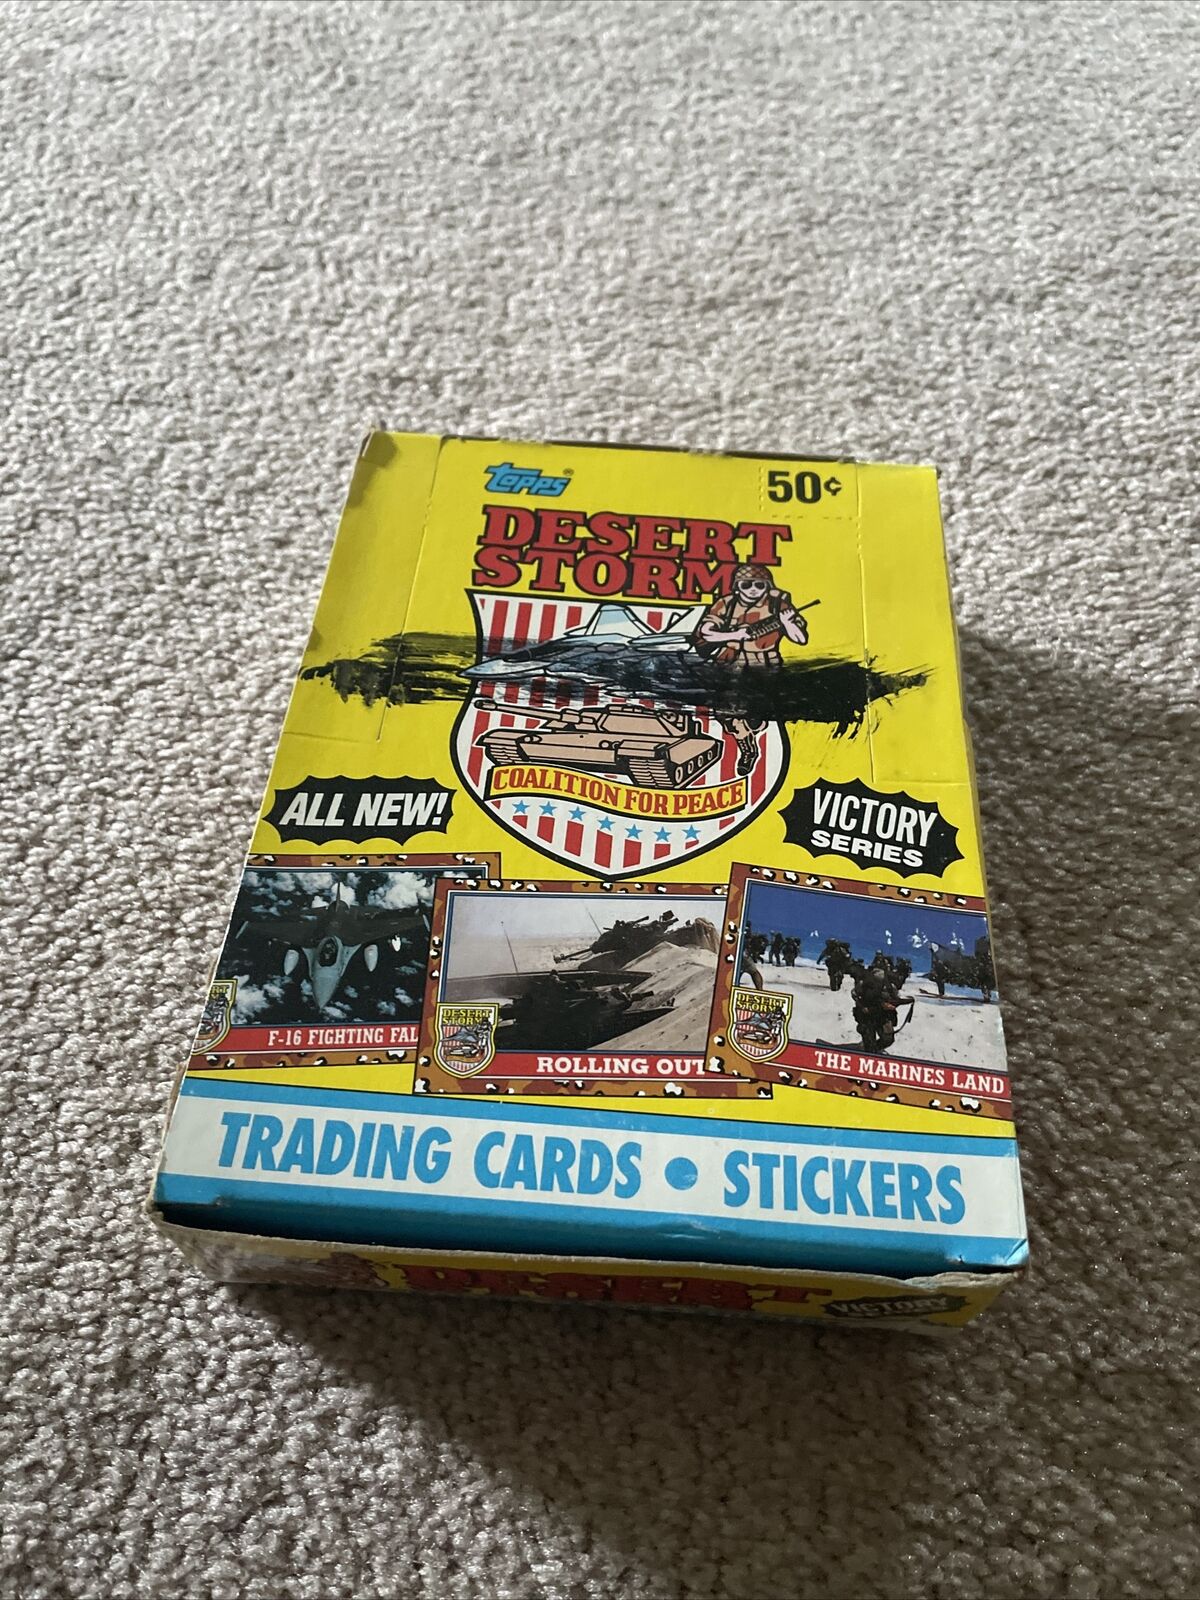 1991 Topps Desert Storm Trading Card 36ct Full Box Unopened Cards Victory Series